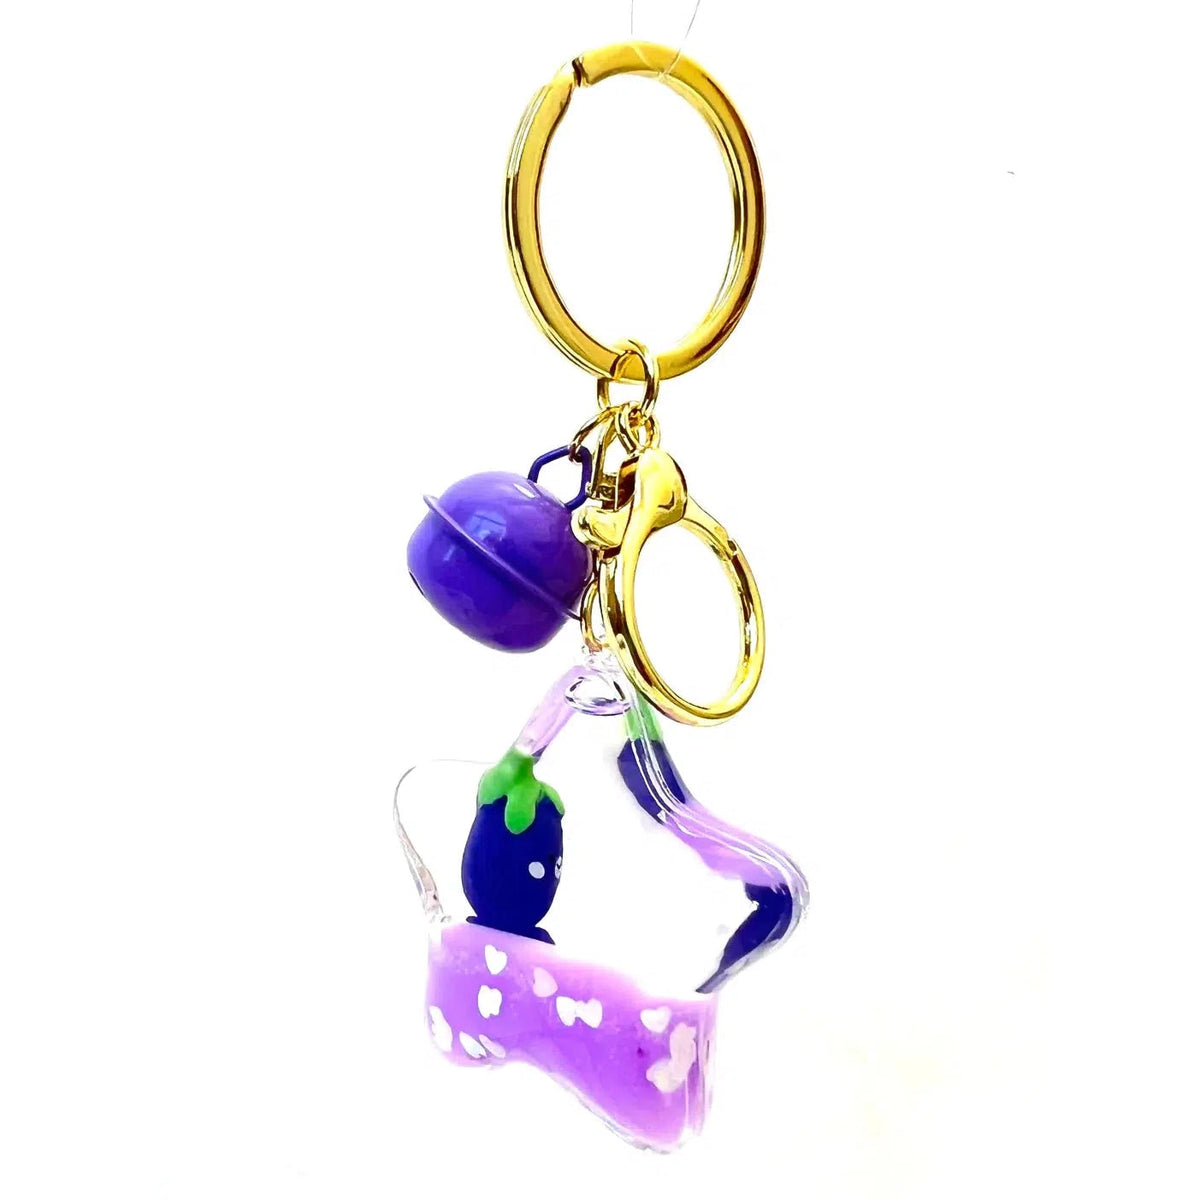 Front view of the star shaped Eggplant Floaty Key Charm showing the bell at the top of the keychain.